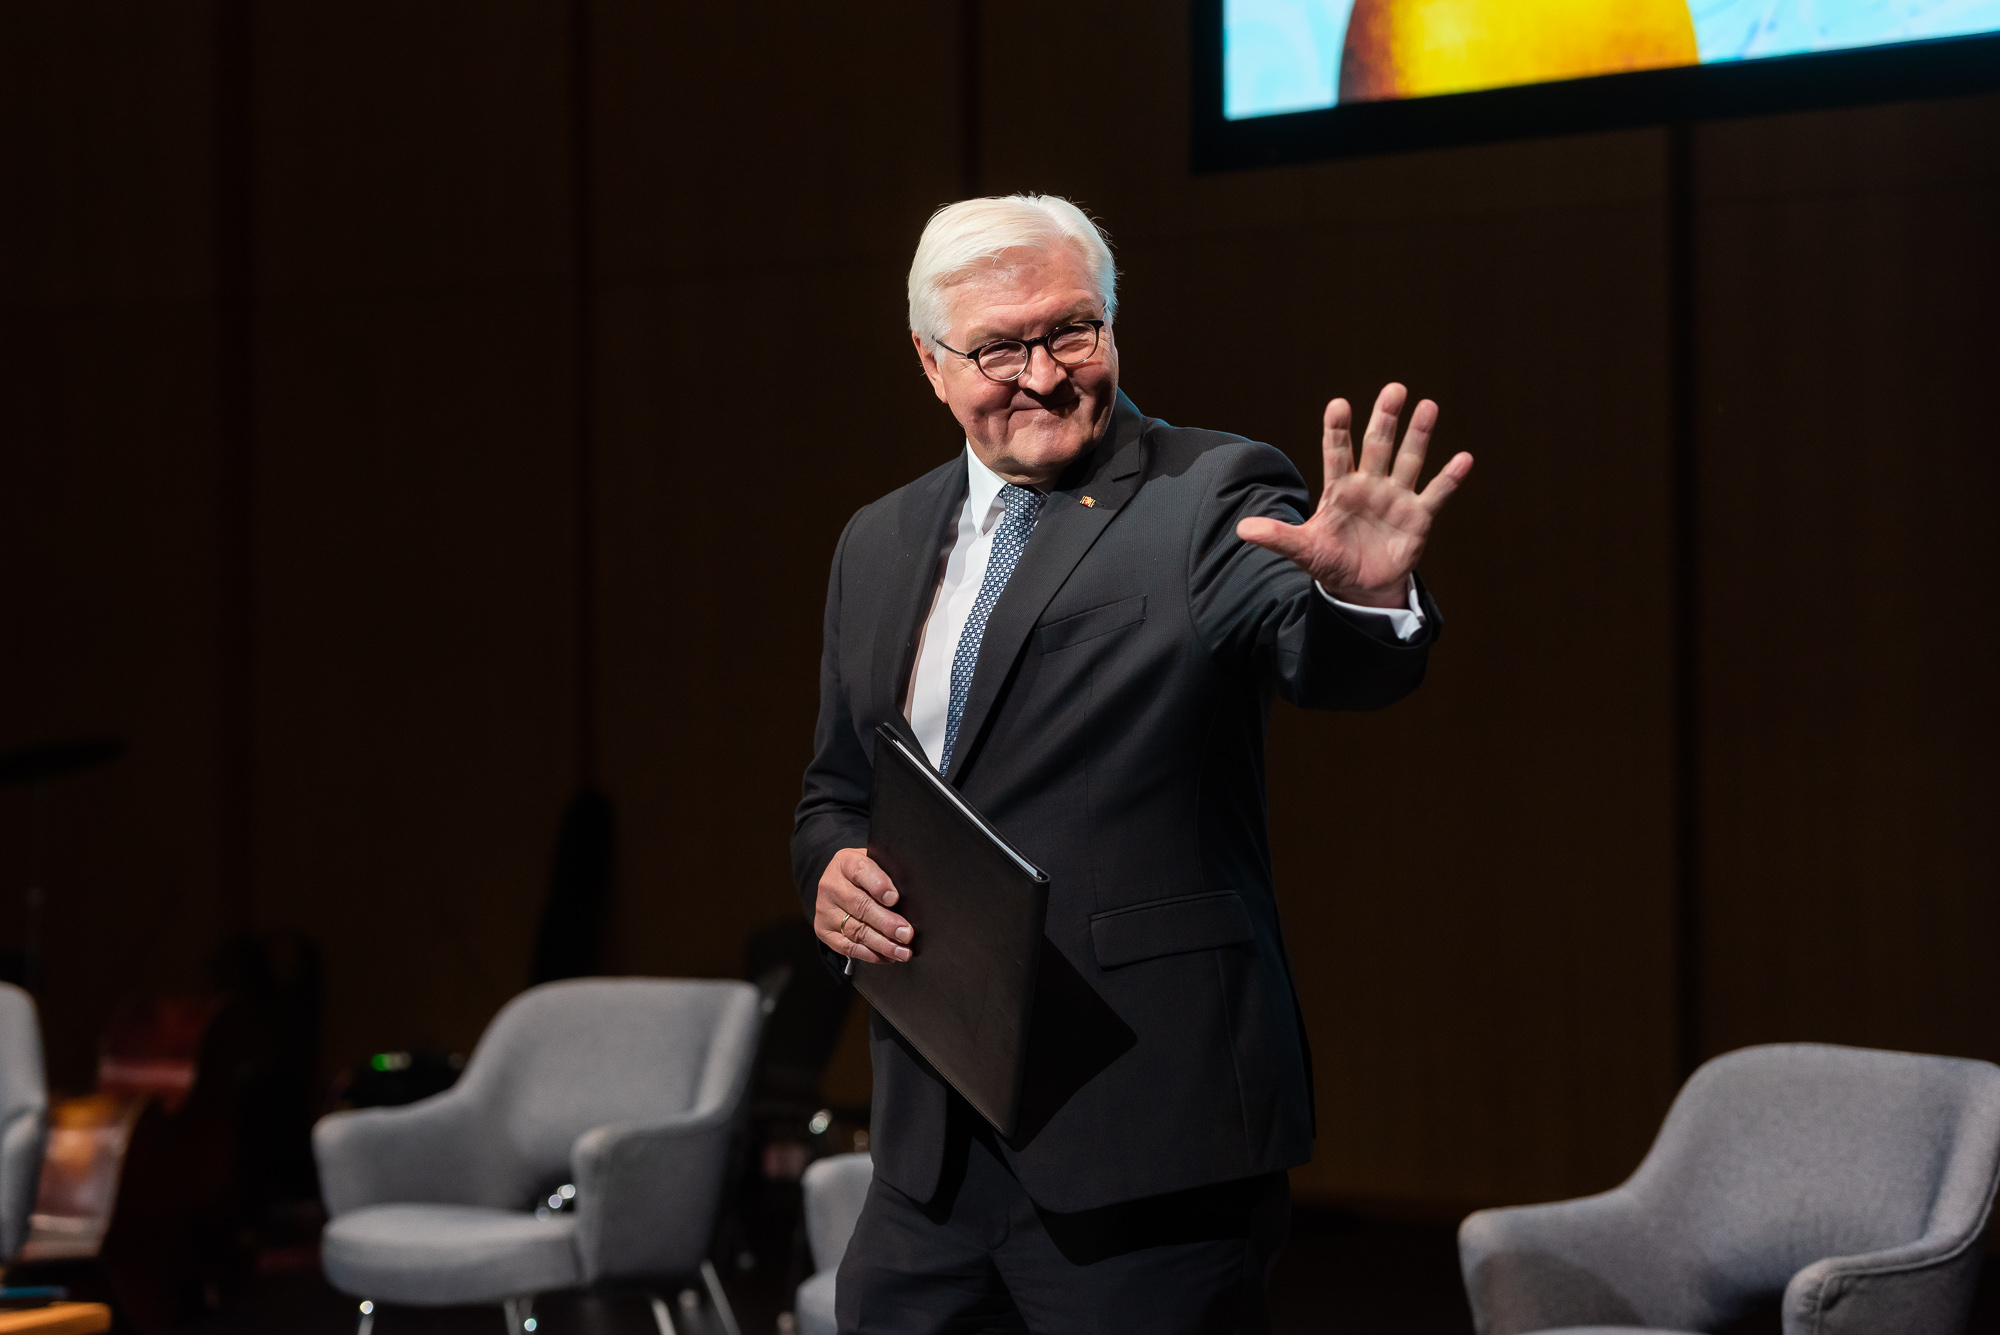 Federal President Frank-Walter Steinmeier gave a moving speech and paid tribute to the generation of "guest workers". Photo: Andreas Schwarz